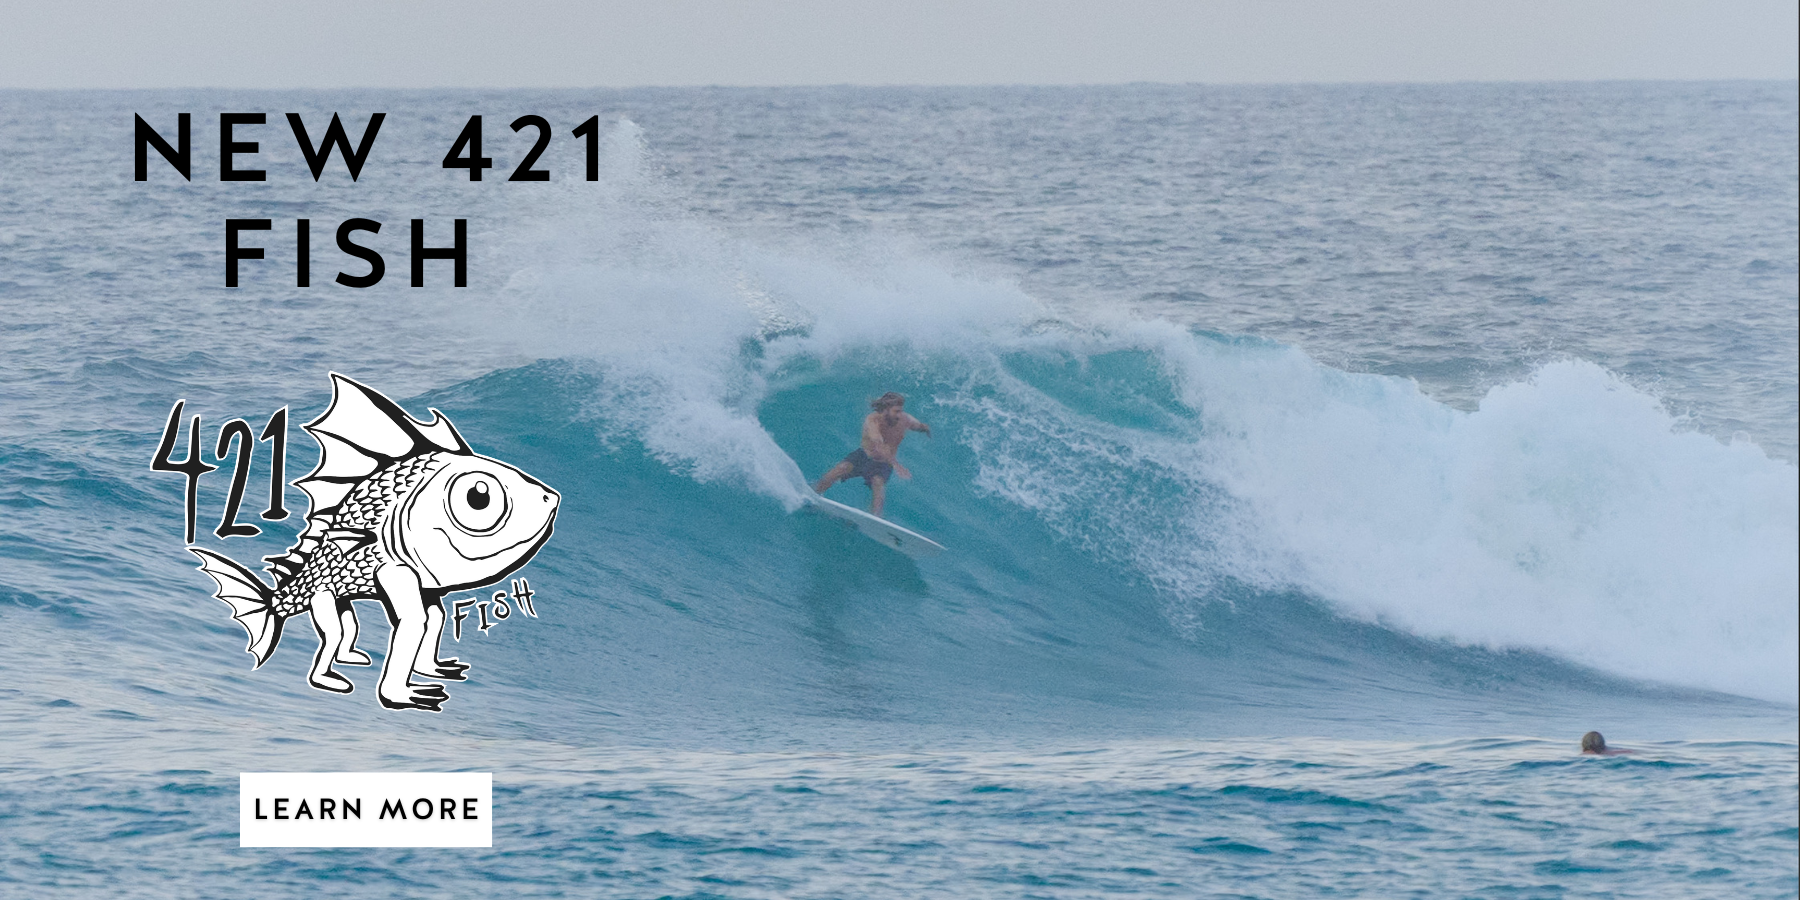 Wade Carmichael on the 421 Fish - Rusty Surfboards